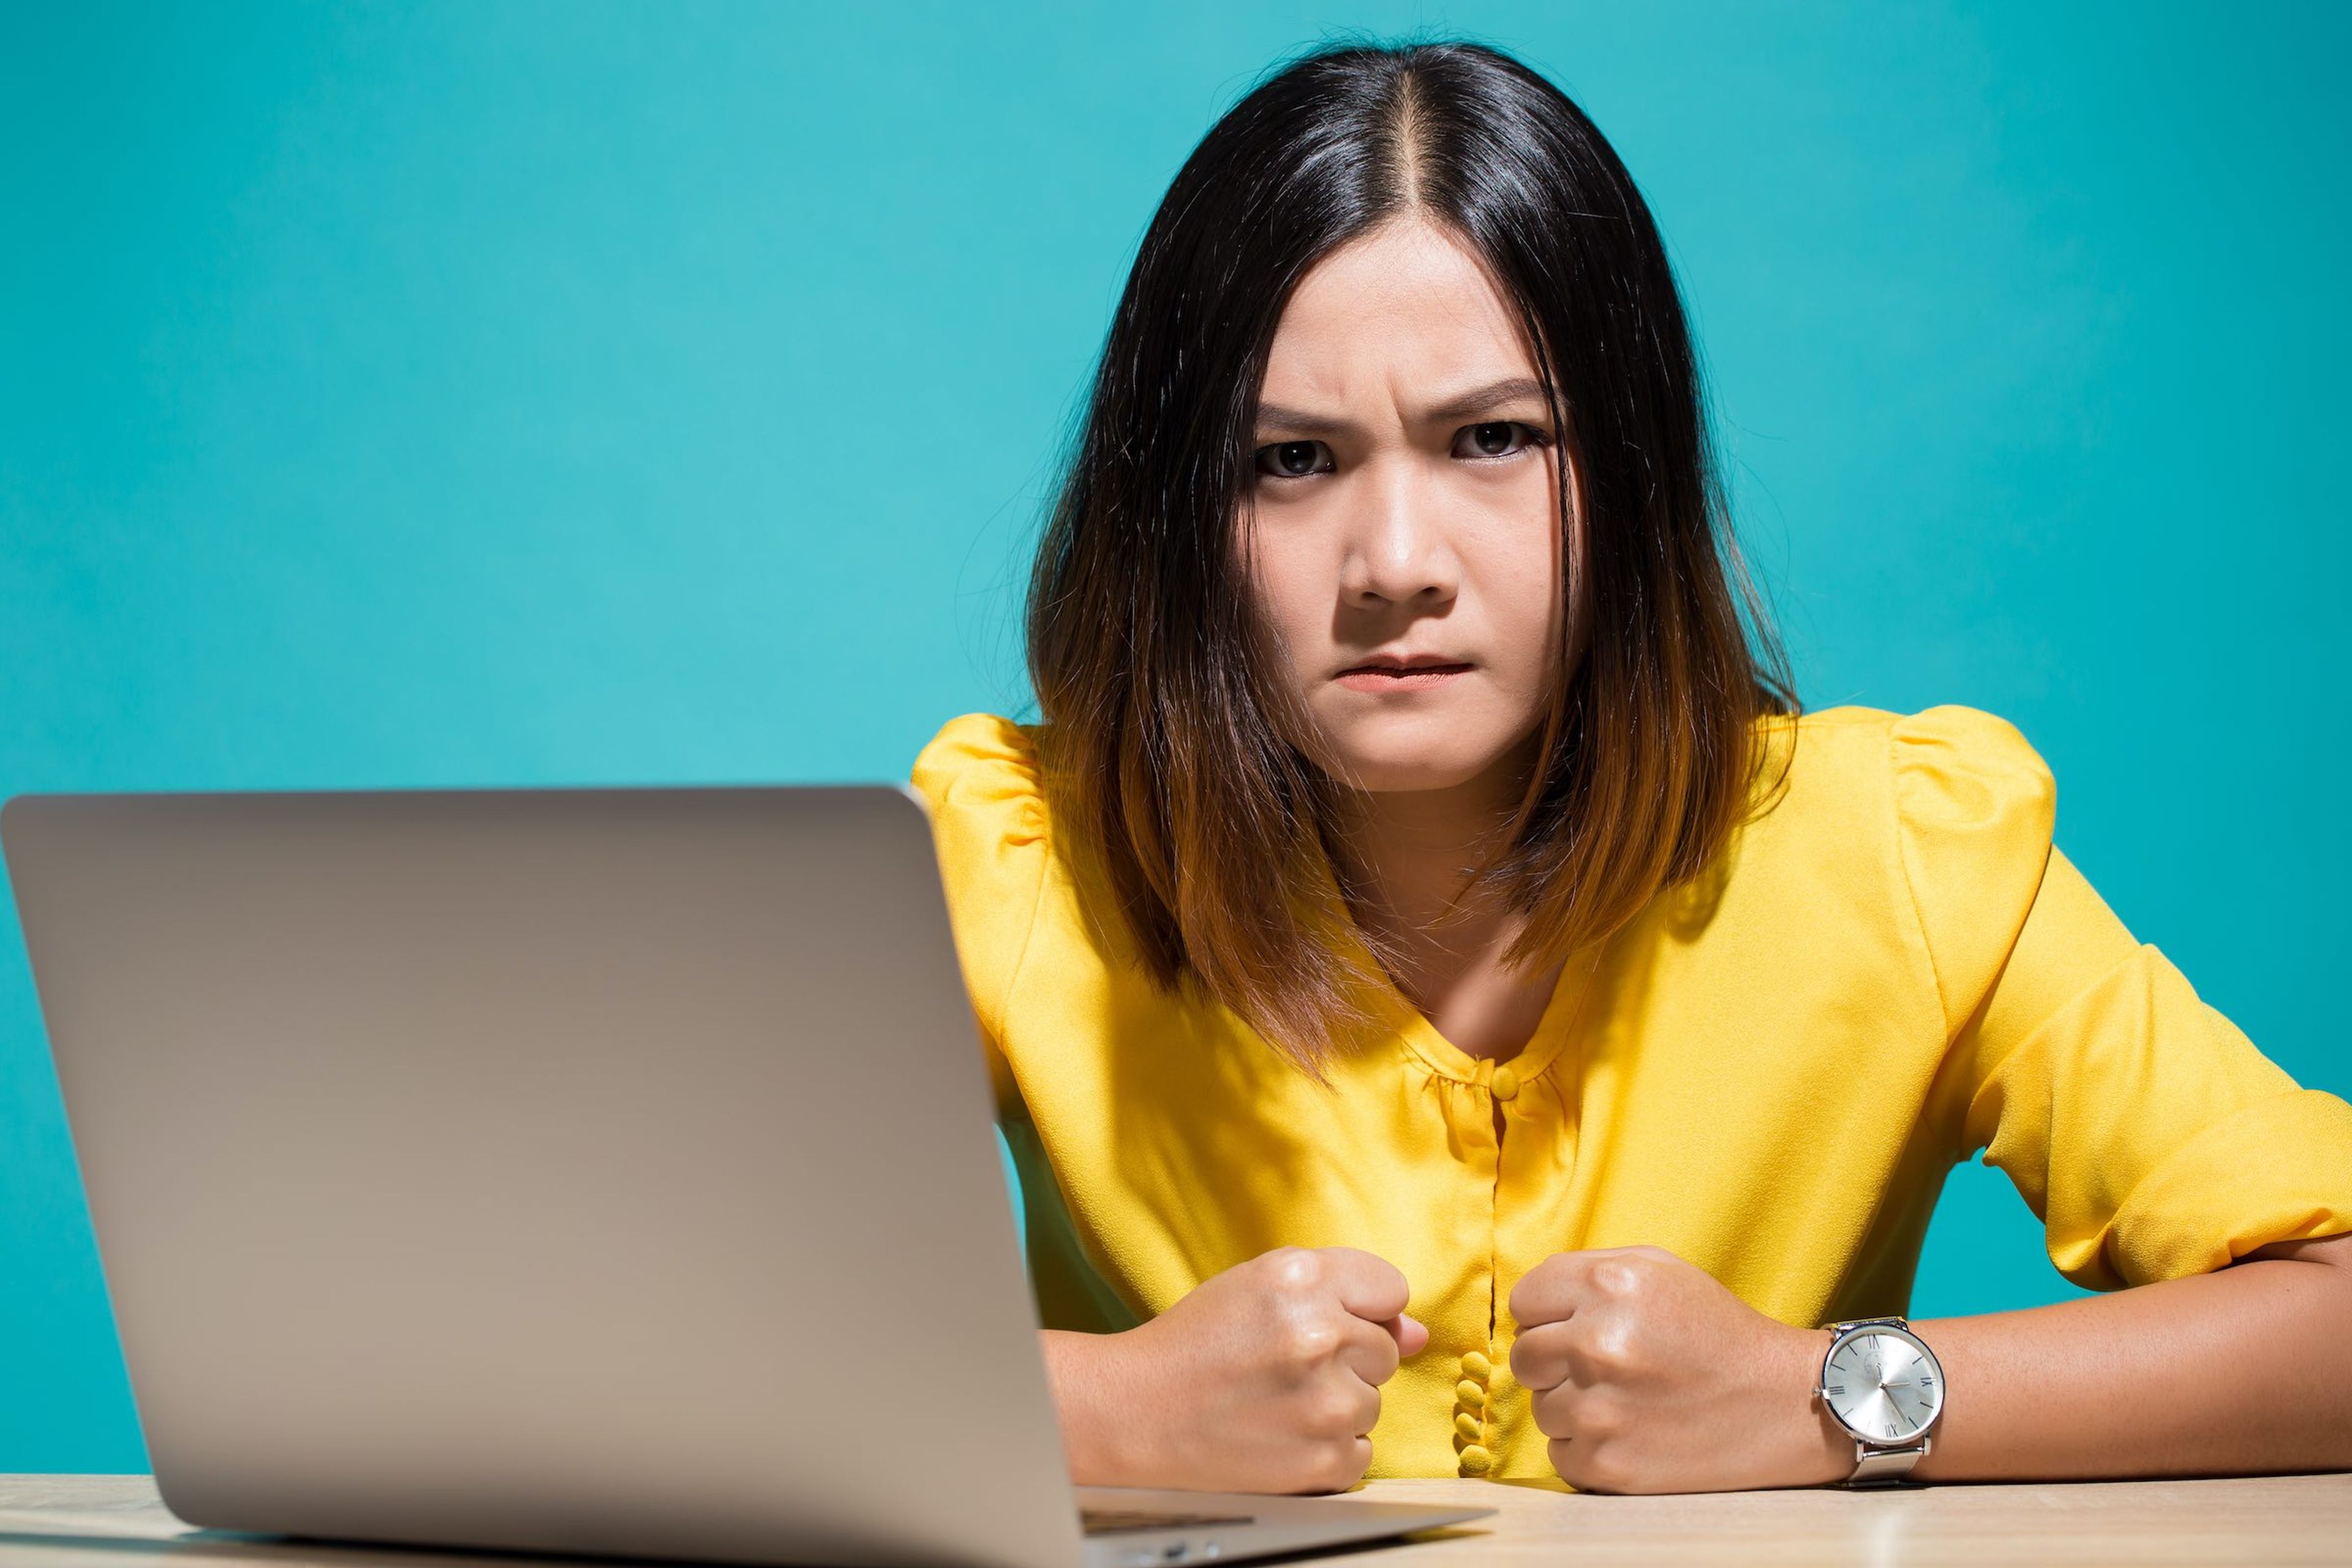 Angry woman in front of a laptop